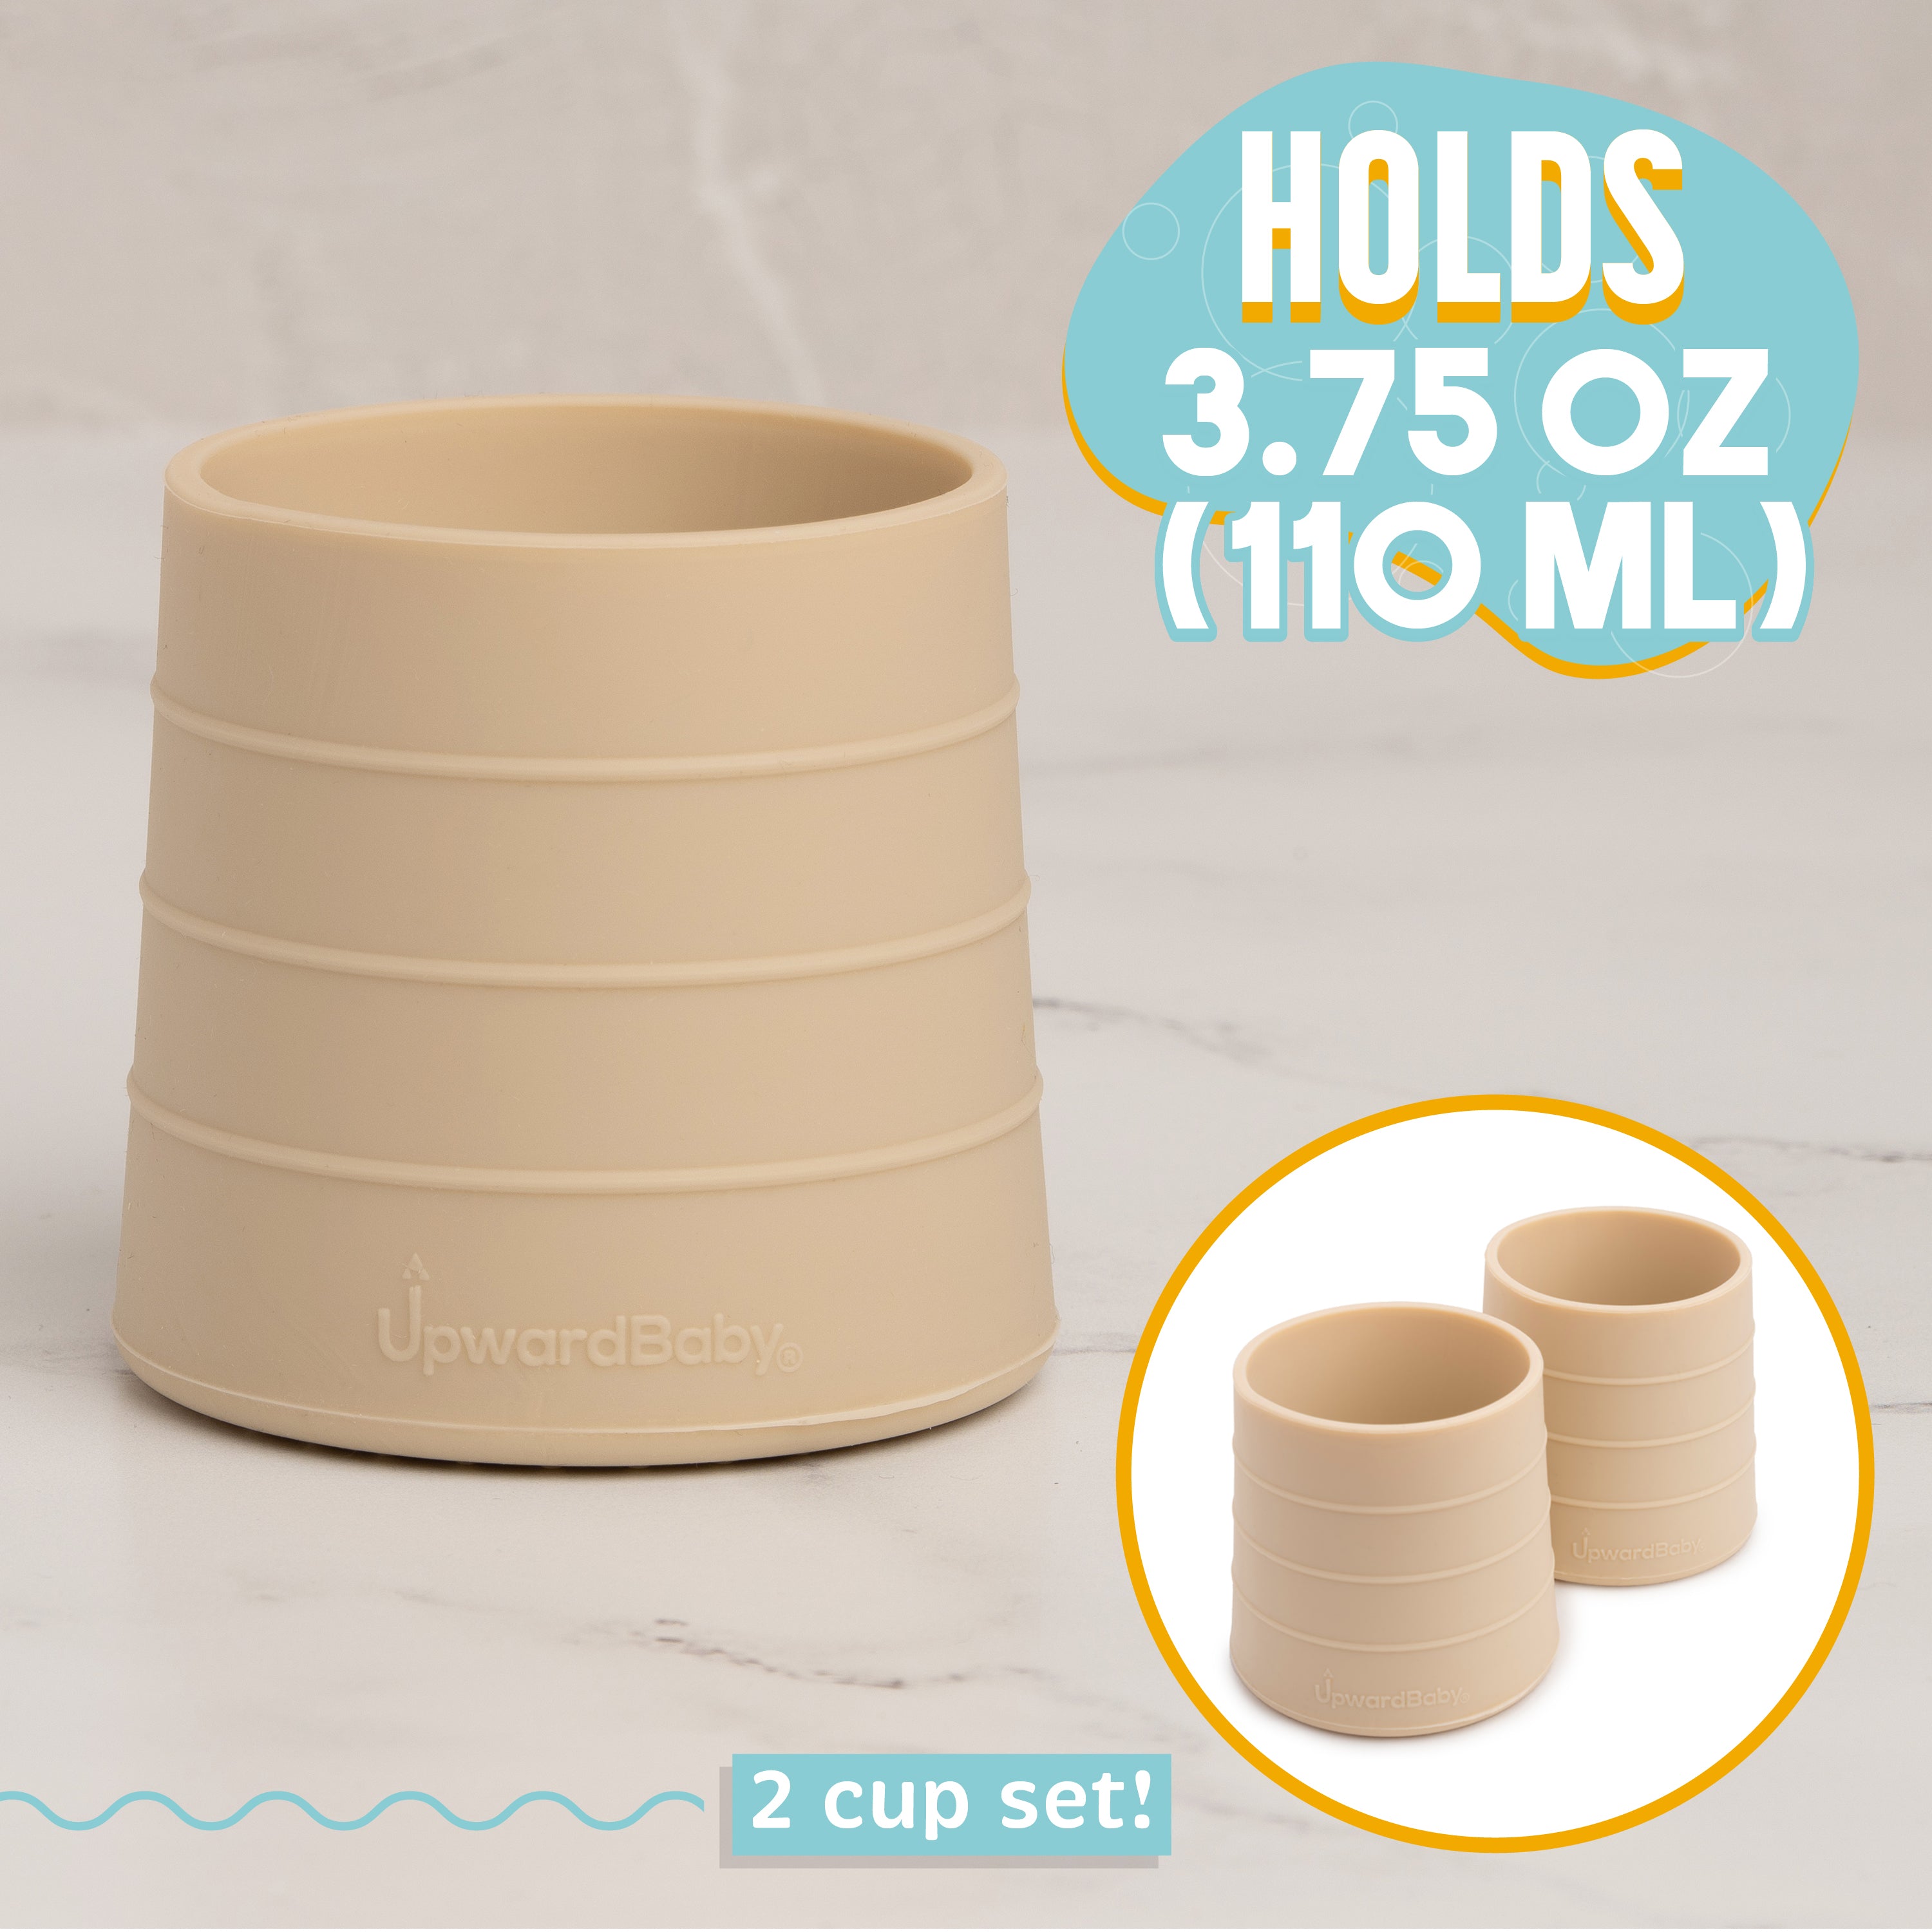 Upwardbaby Silicone Cups 2 PC Set - Transition Baby Open Cup from Bottle + Easy Grip Toddler Cups Spill Proof for 1 Year Old + Montessori Silicone